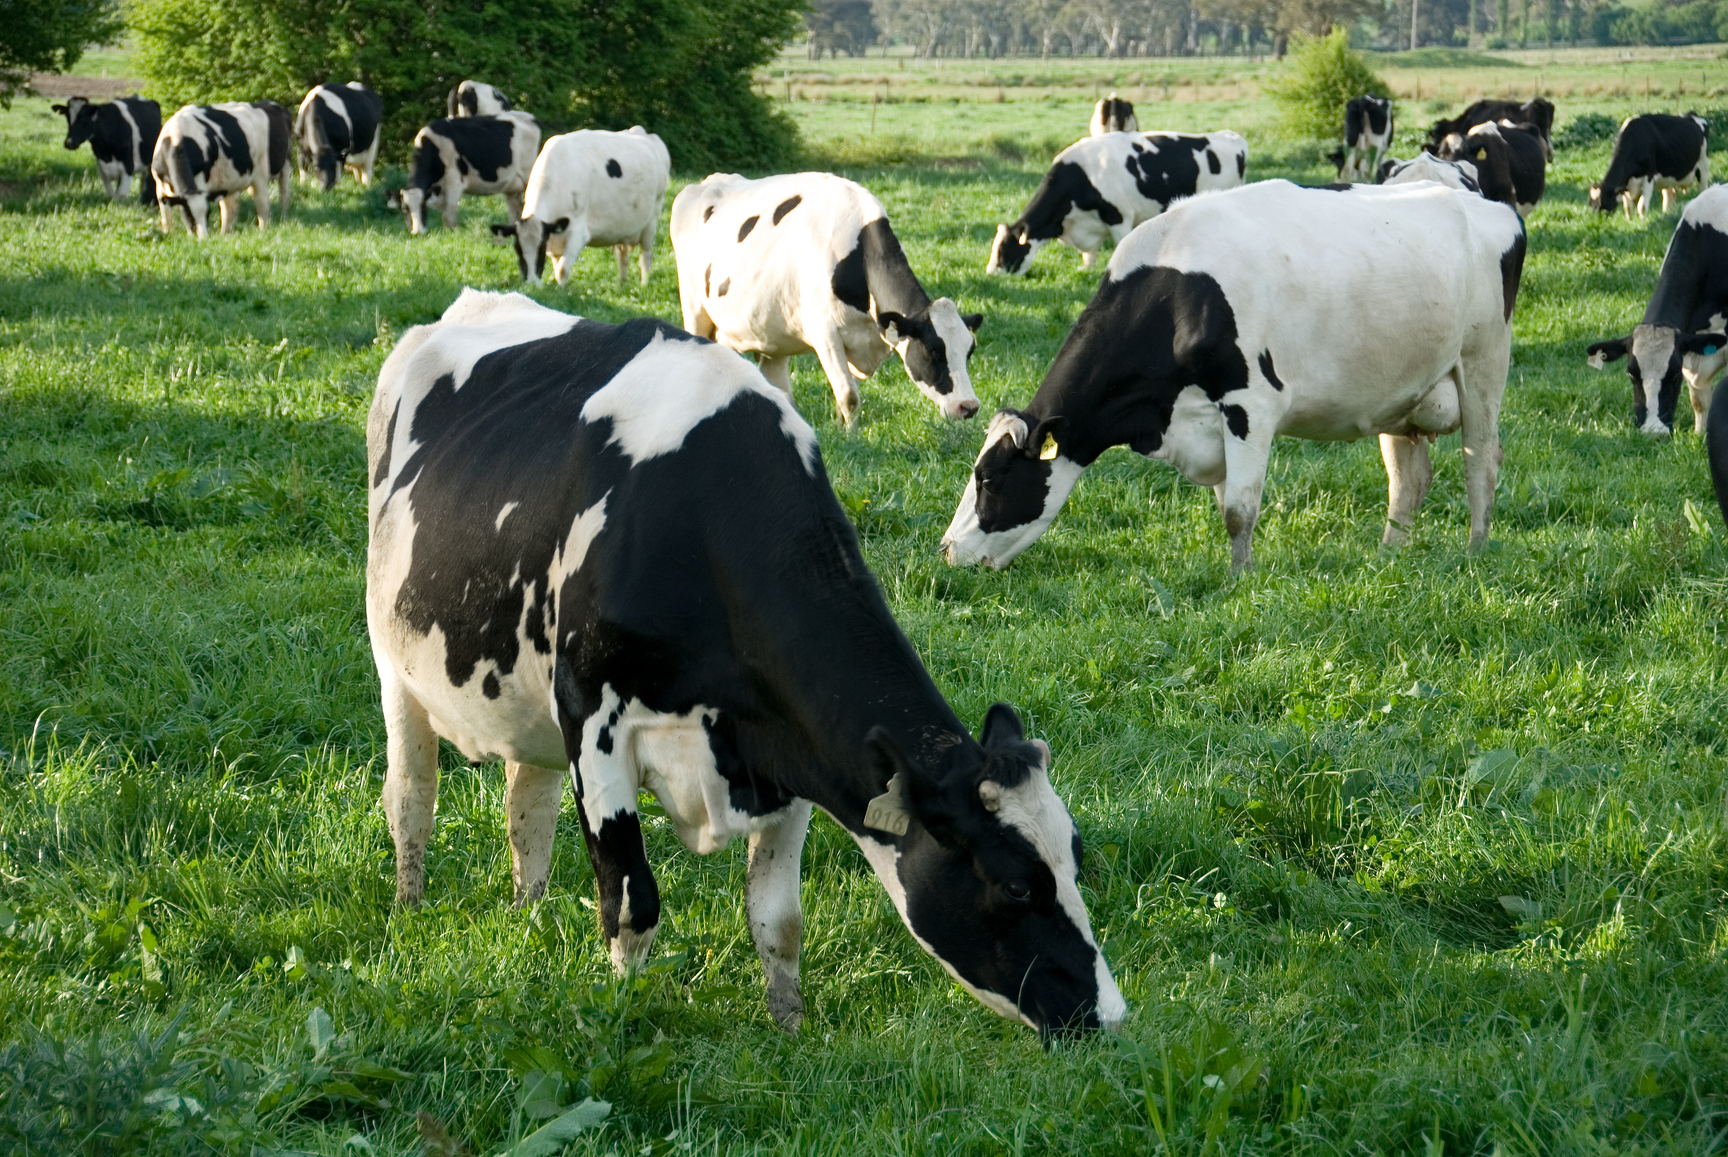 The report states that more than 60% of dairy POs have earned better or more stable milk prices for their farmers